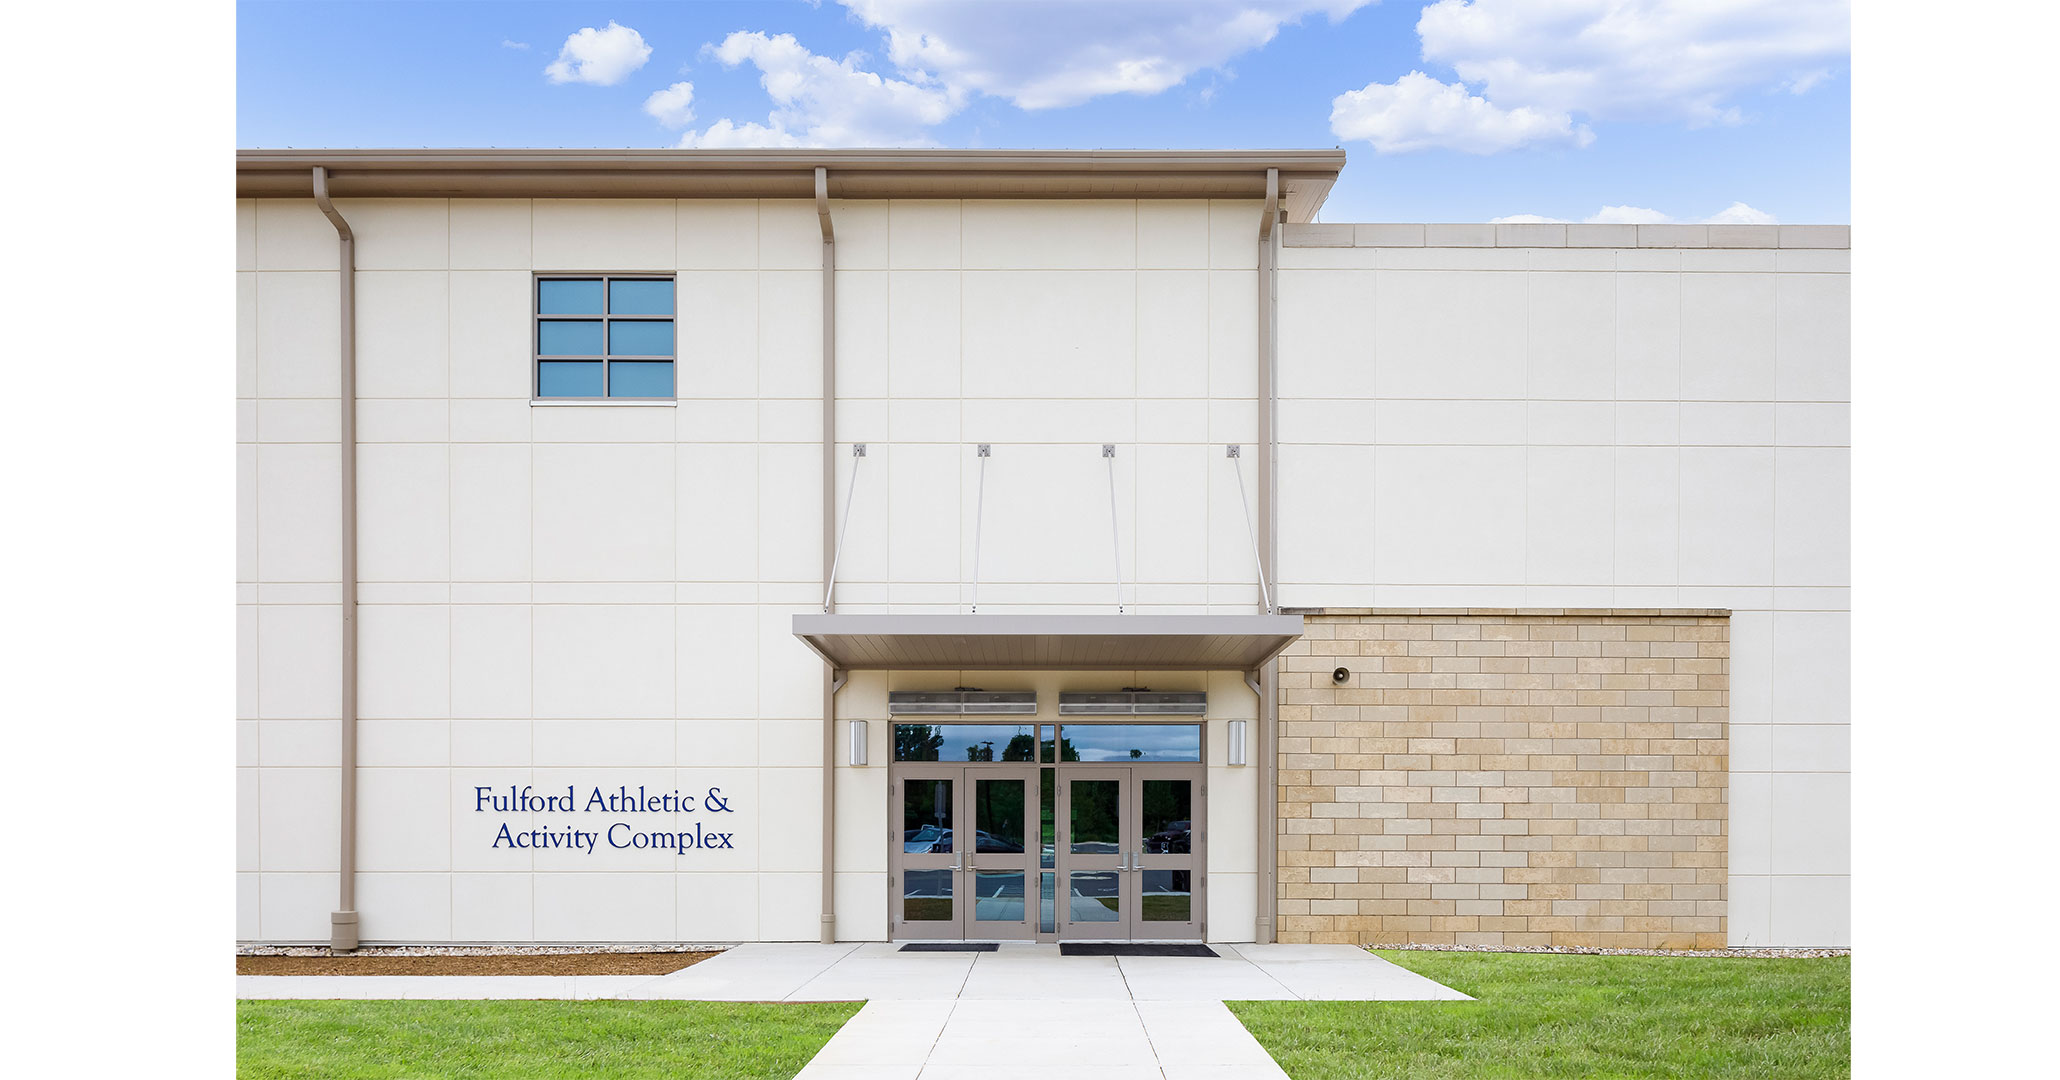 The Charlotte Diocese and Christ the King Catholic High School worked with Boudreaux master planners and architects to design the new gymnasium.